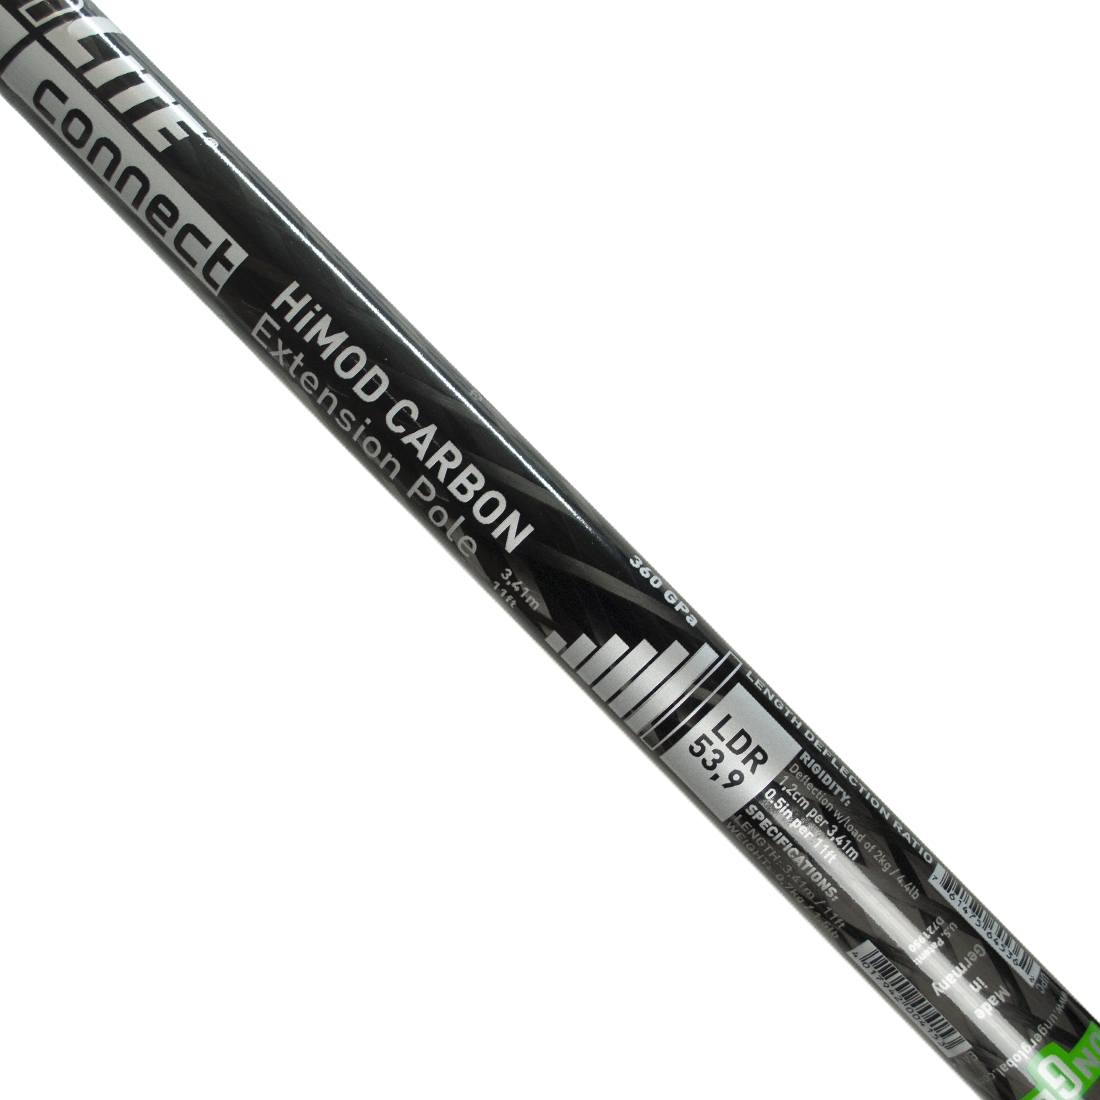 Unger nLite HiMod Carbon Extension Pole - 11 Foot - Decal Close-Up View